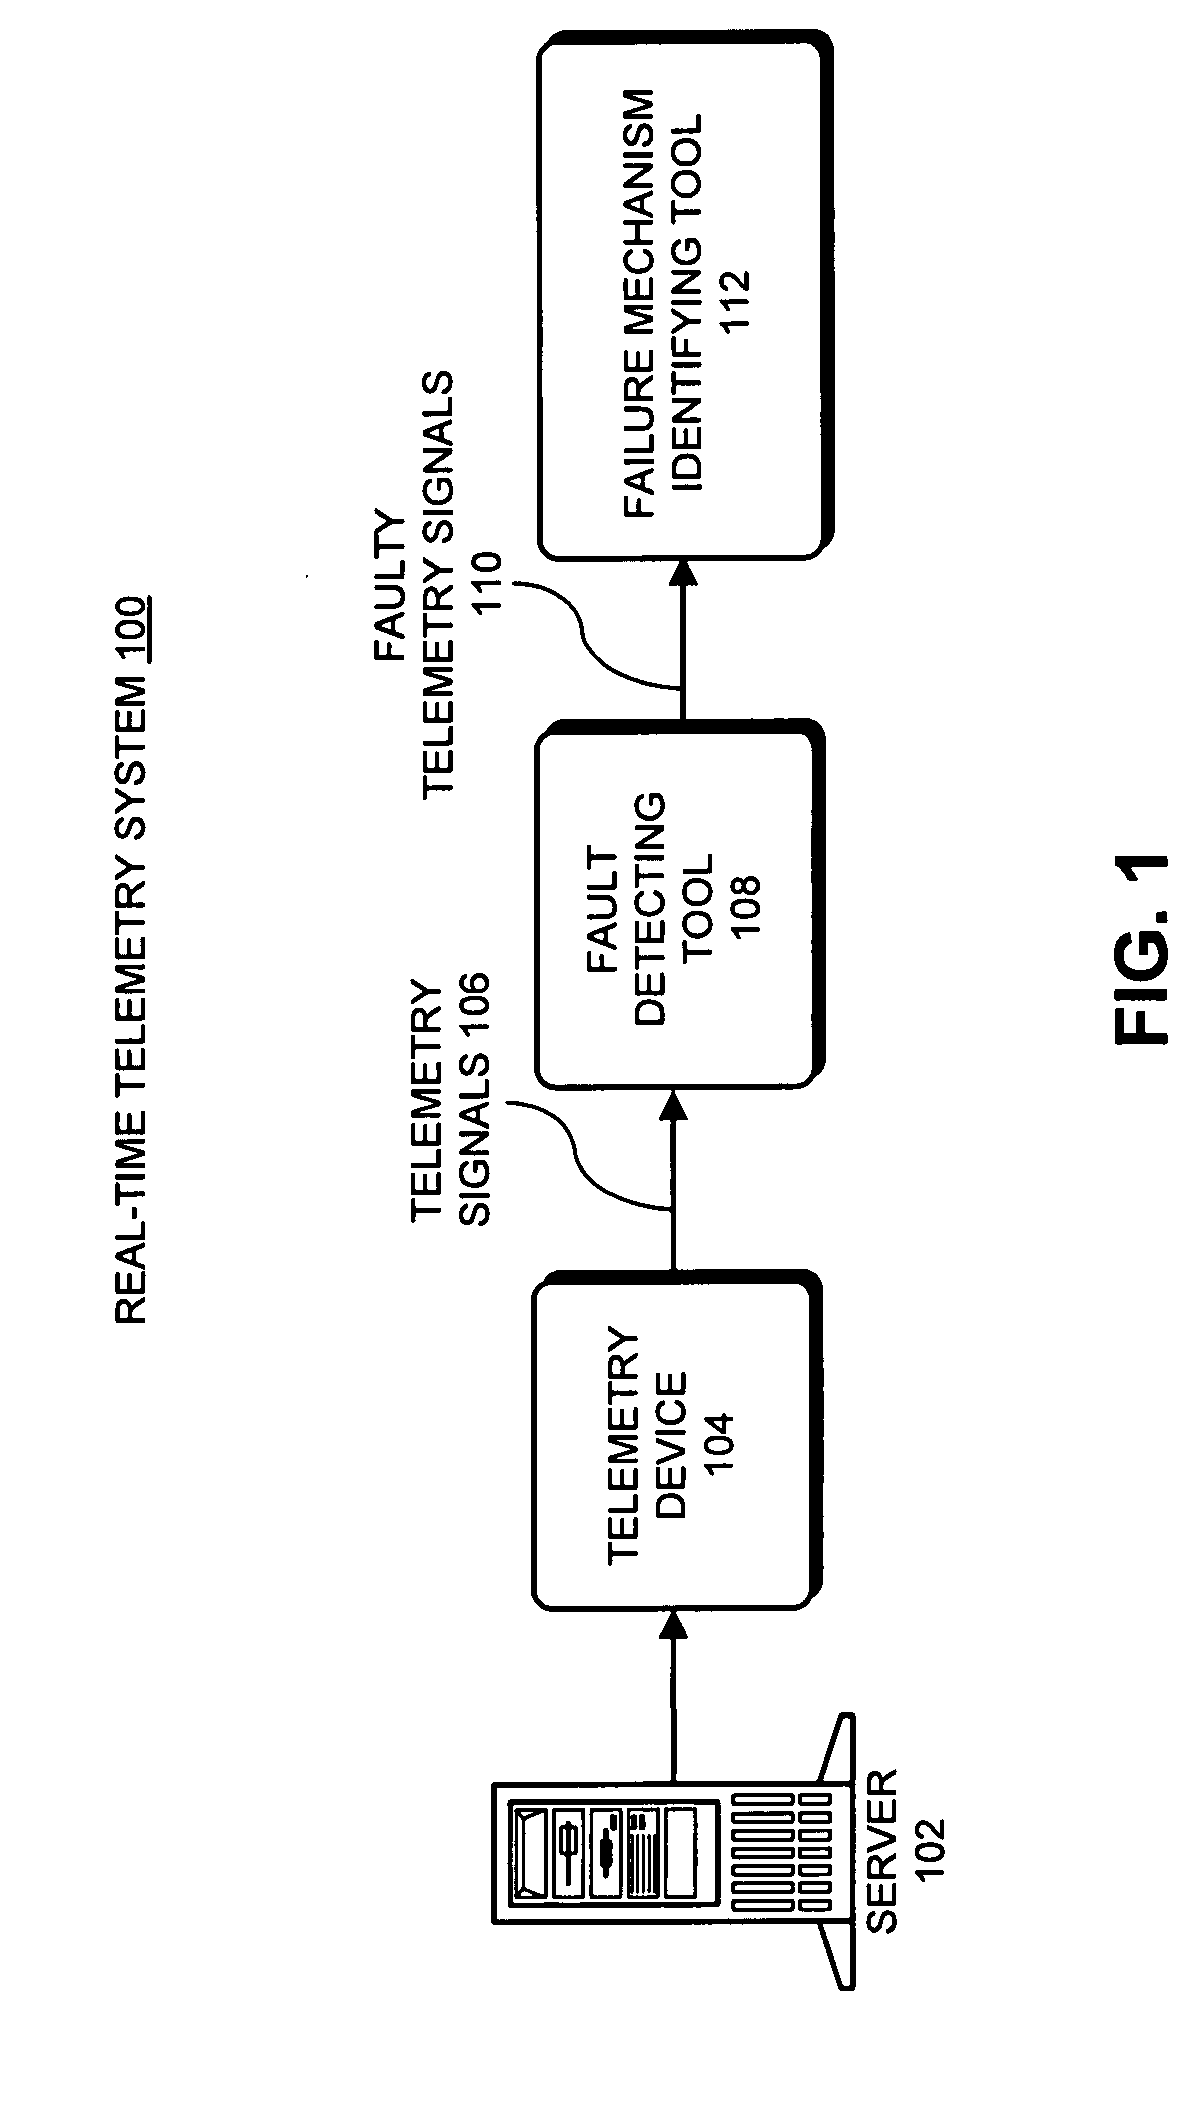 Method and apparatus for dynamically adjusting the resolution of telemetry signals